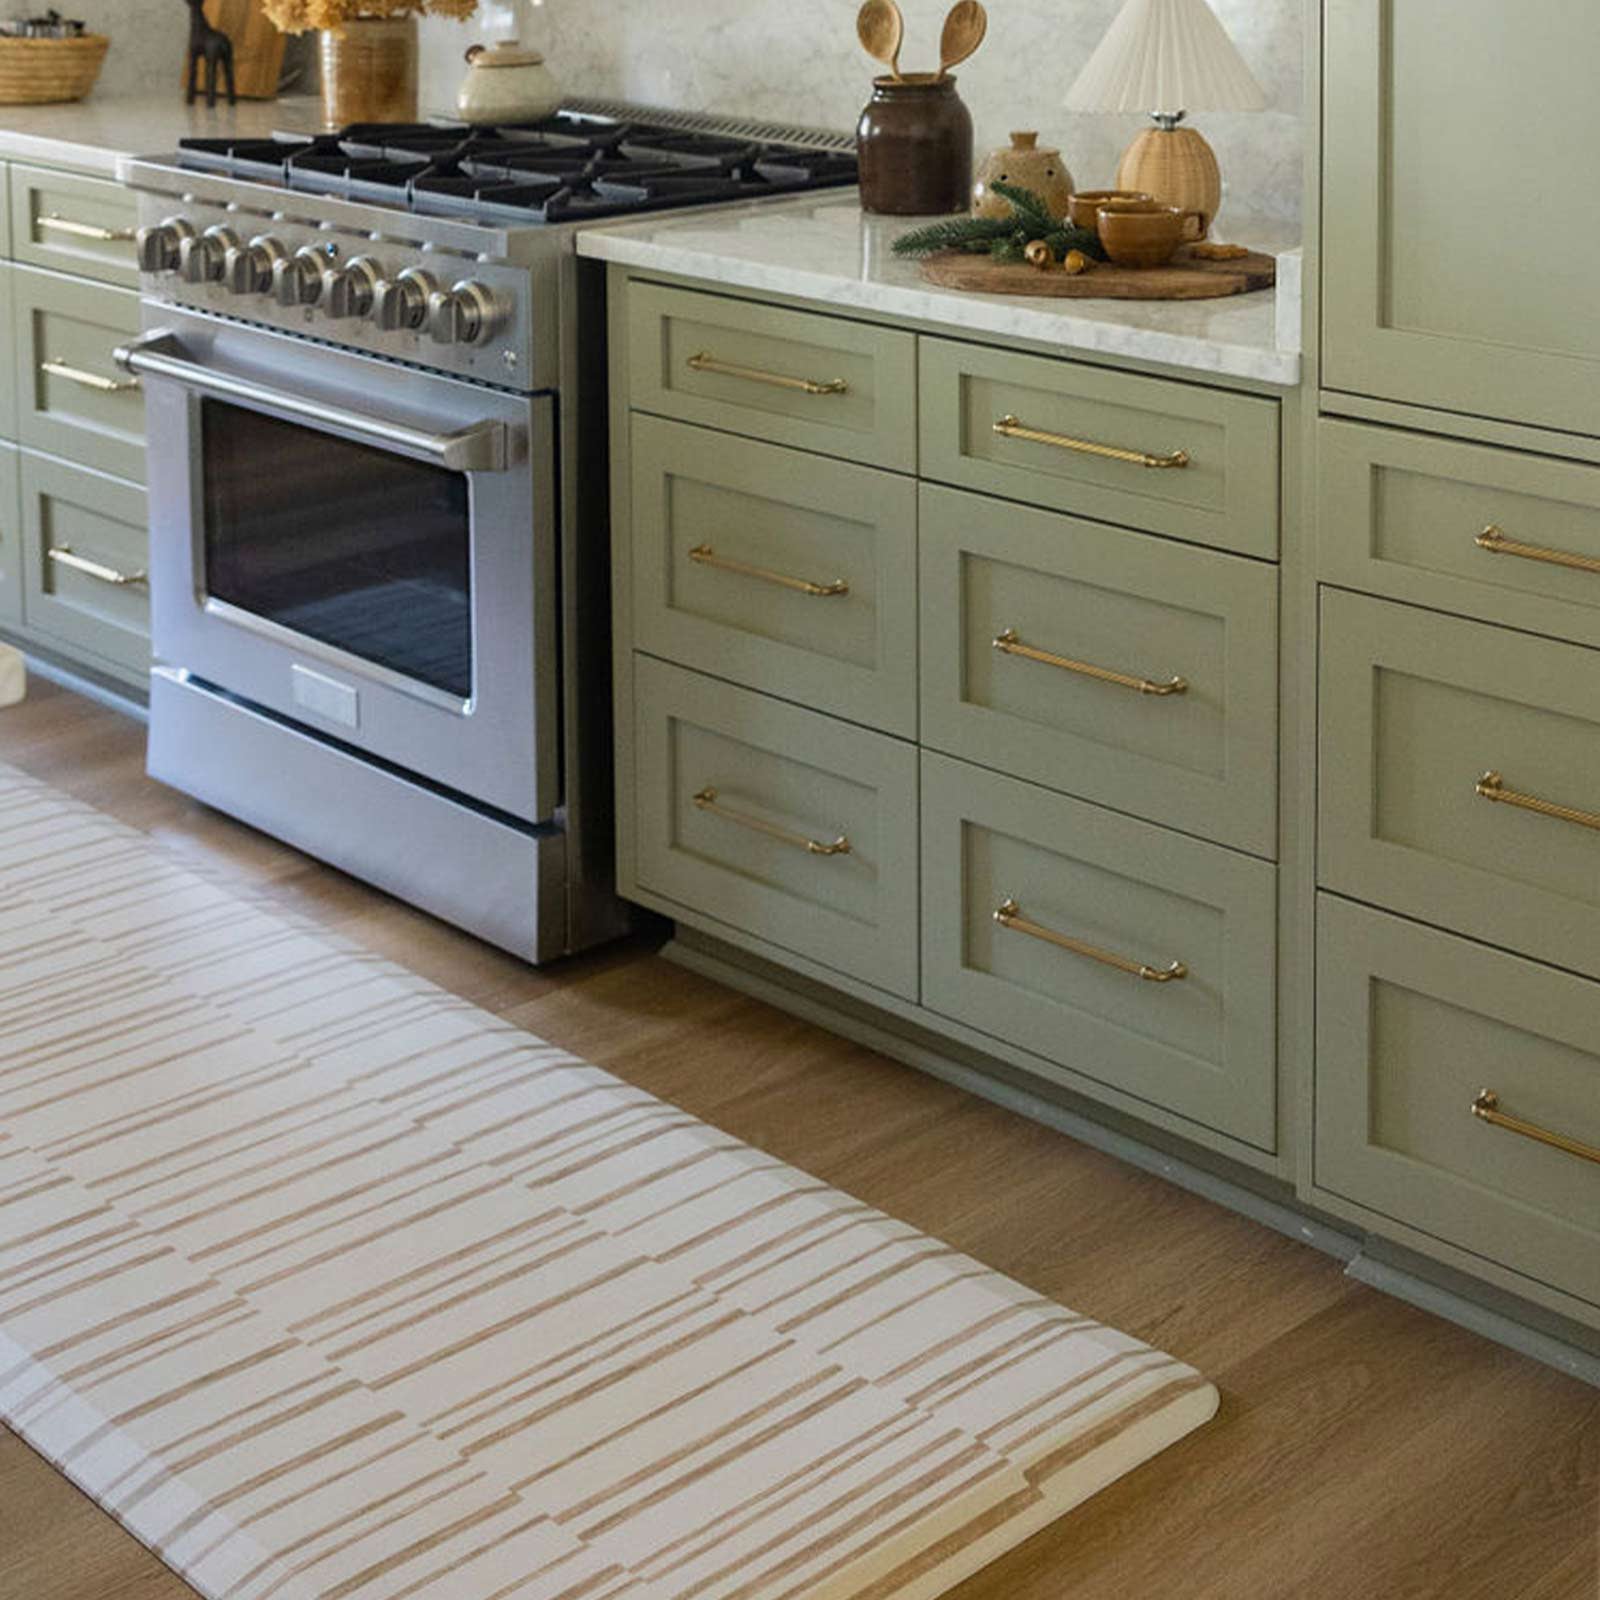 Nara natural beige and cream inverted stripe standing mat shown in kitchen in front of counter in size 30x108